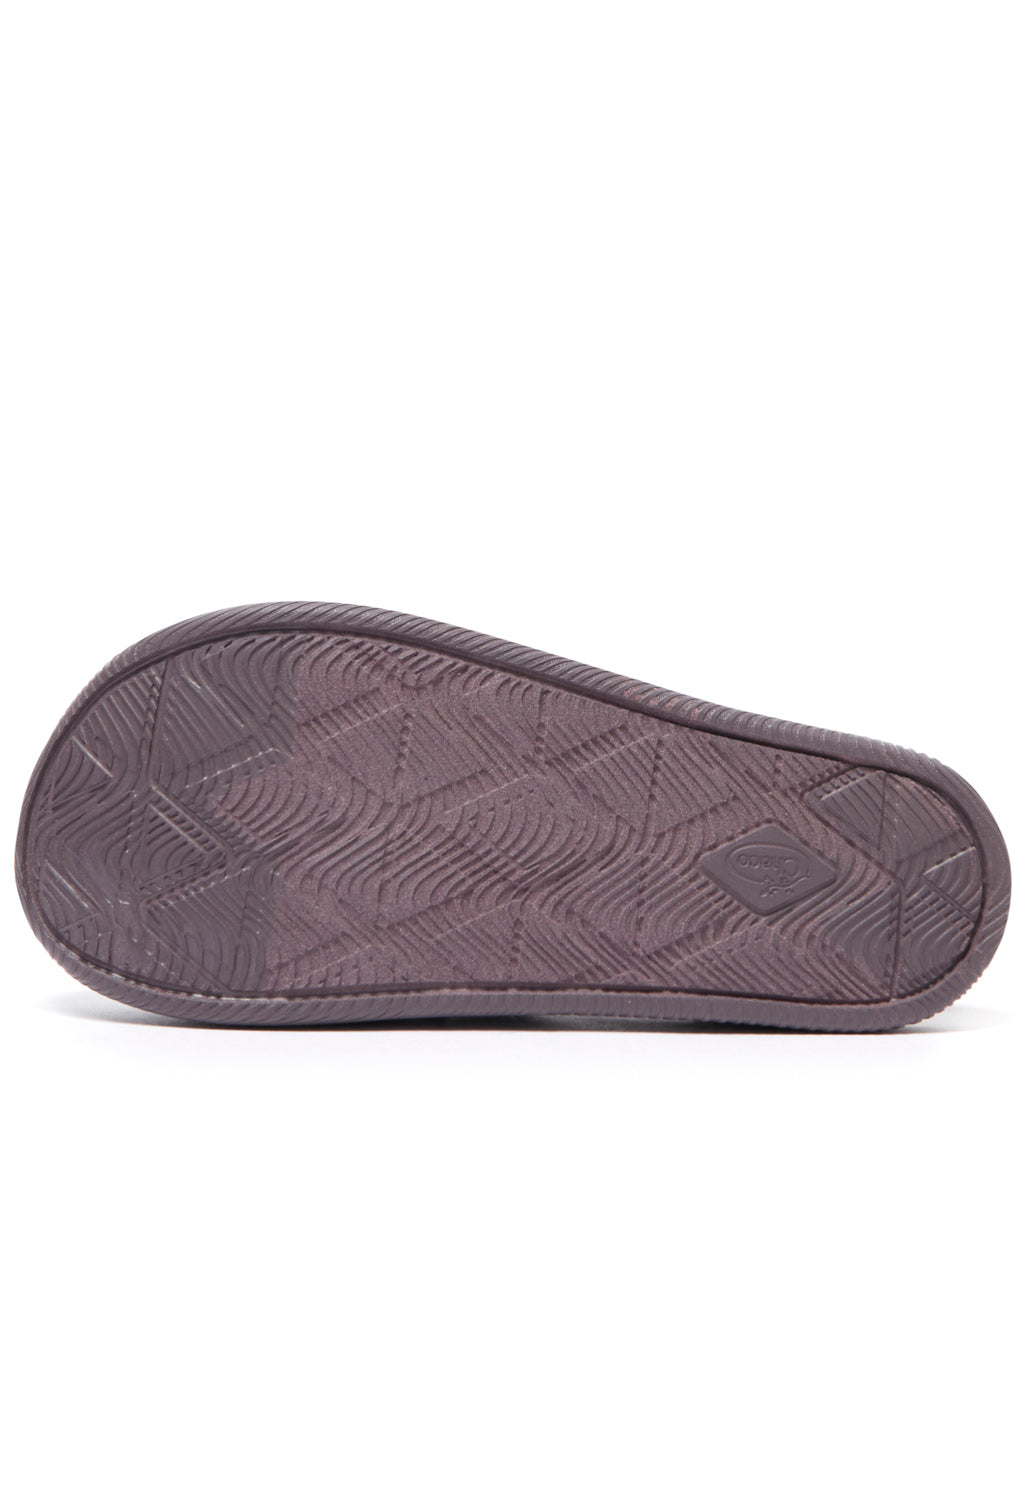 Chaco Women's Chillos Clogs - Sparrow